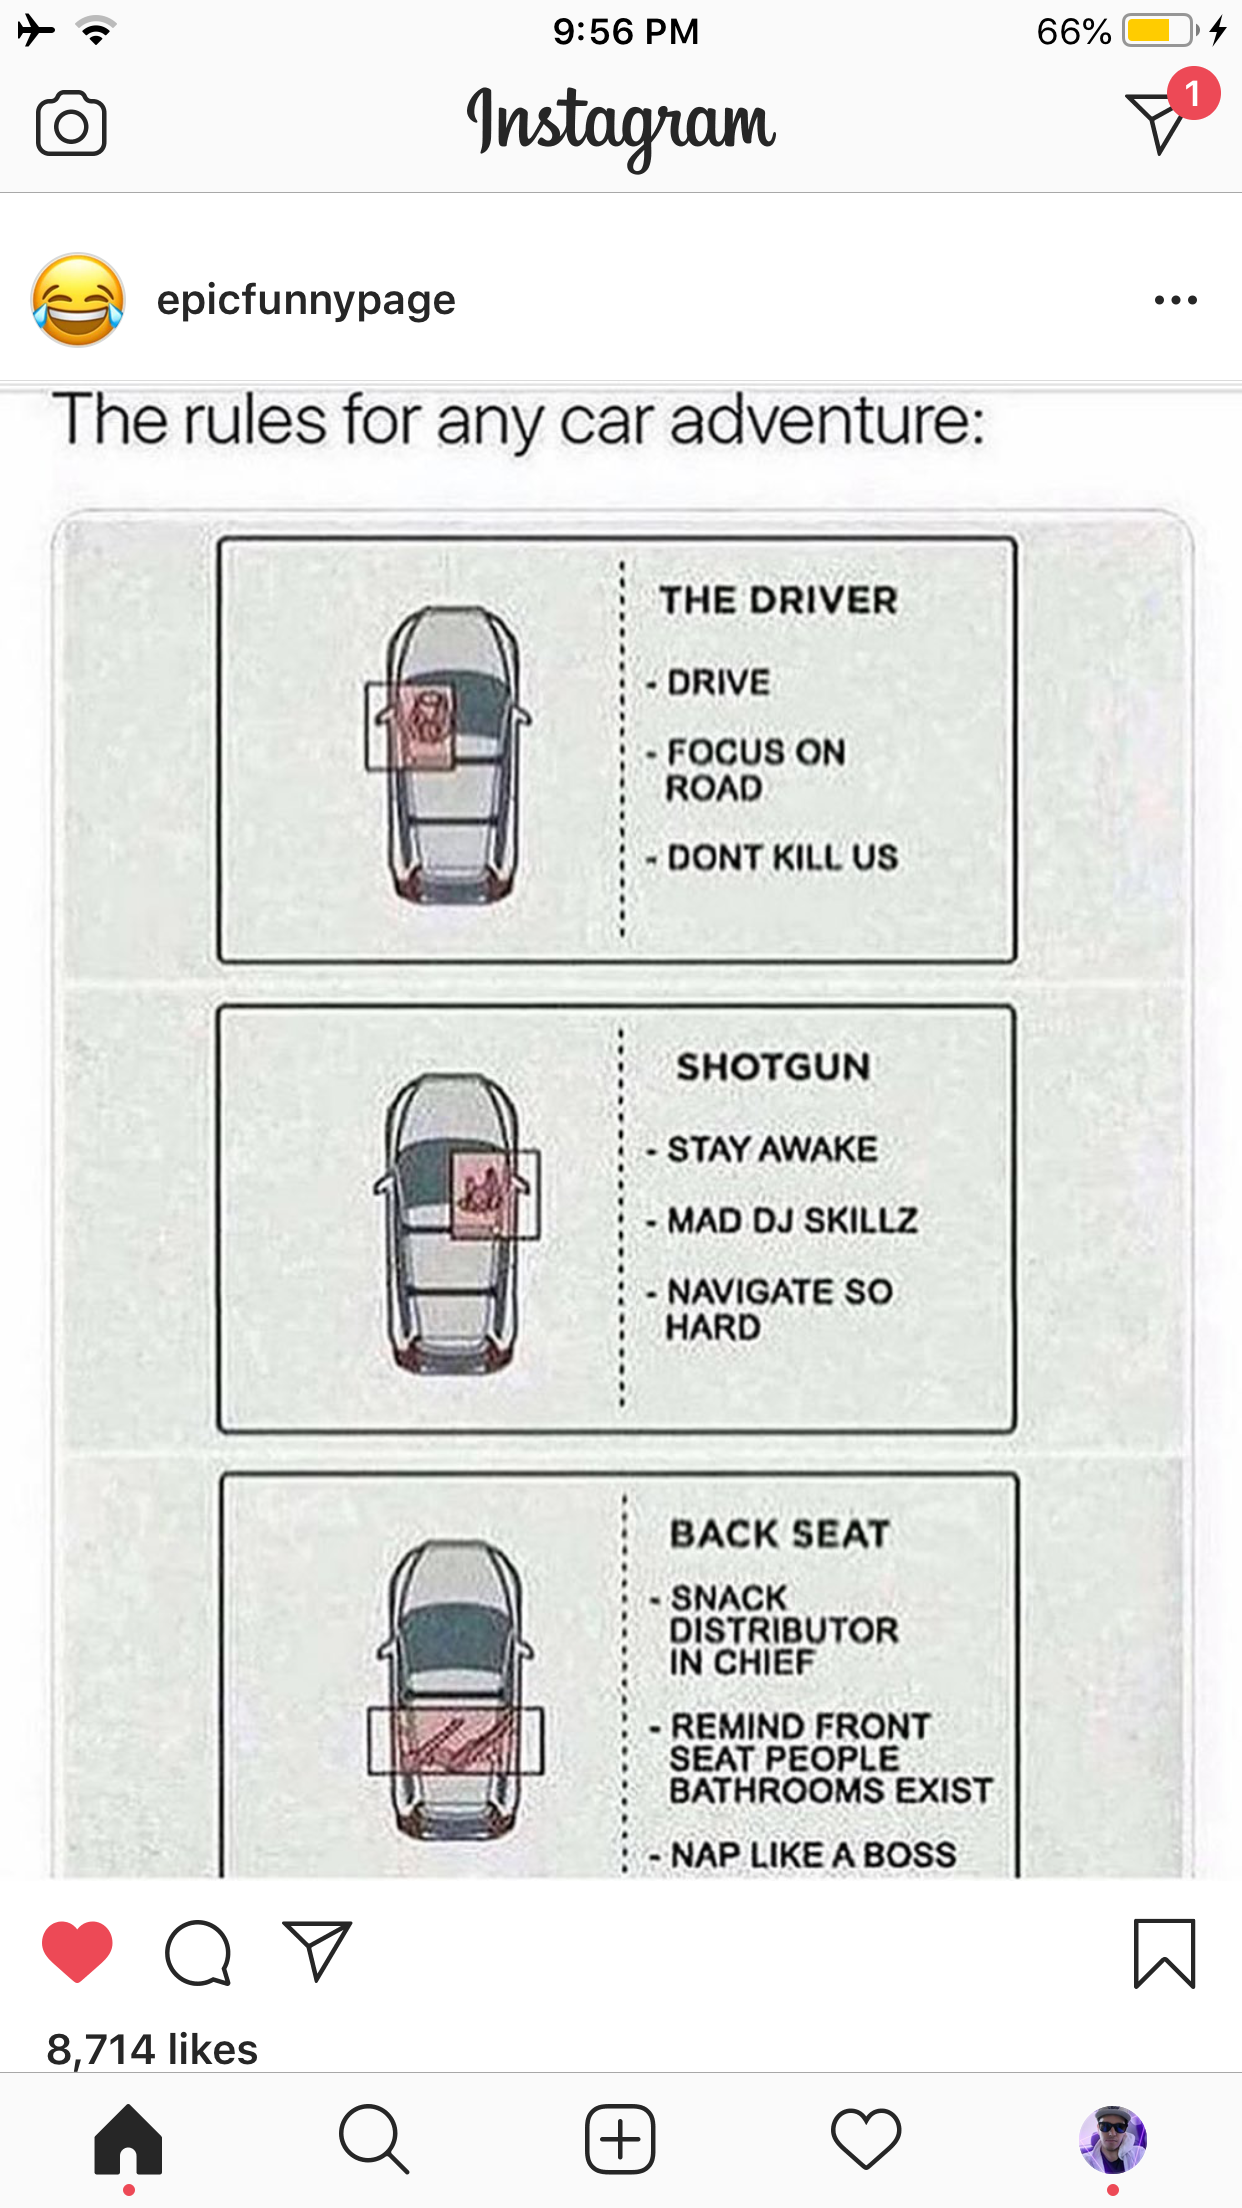 car rules meme - 66% Instagram epicfunnypage The rules for any car adventure The Driver Drive Focus On Road Dont Kill Us Shotgun Stay Awake Mad Dj Skillz Navigate So Hard Back Seat Snack Distributor In Chief Remind Front Seat People Bathrooms Exist Nap A 